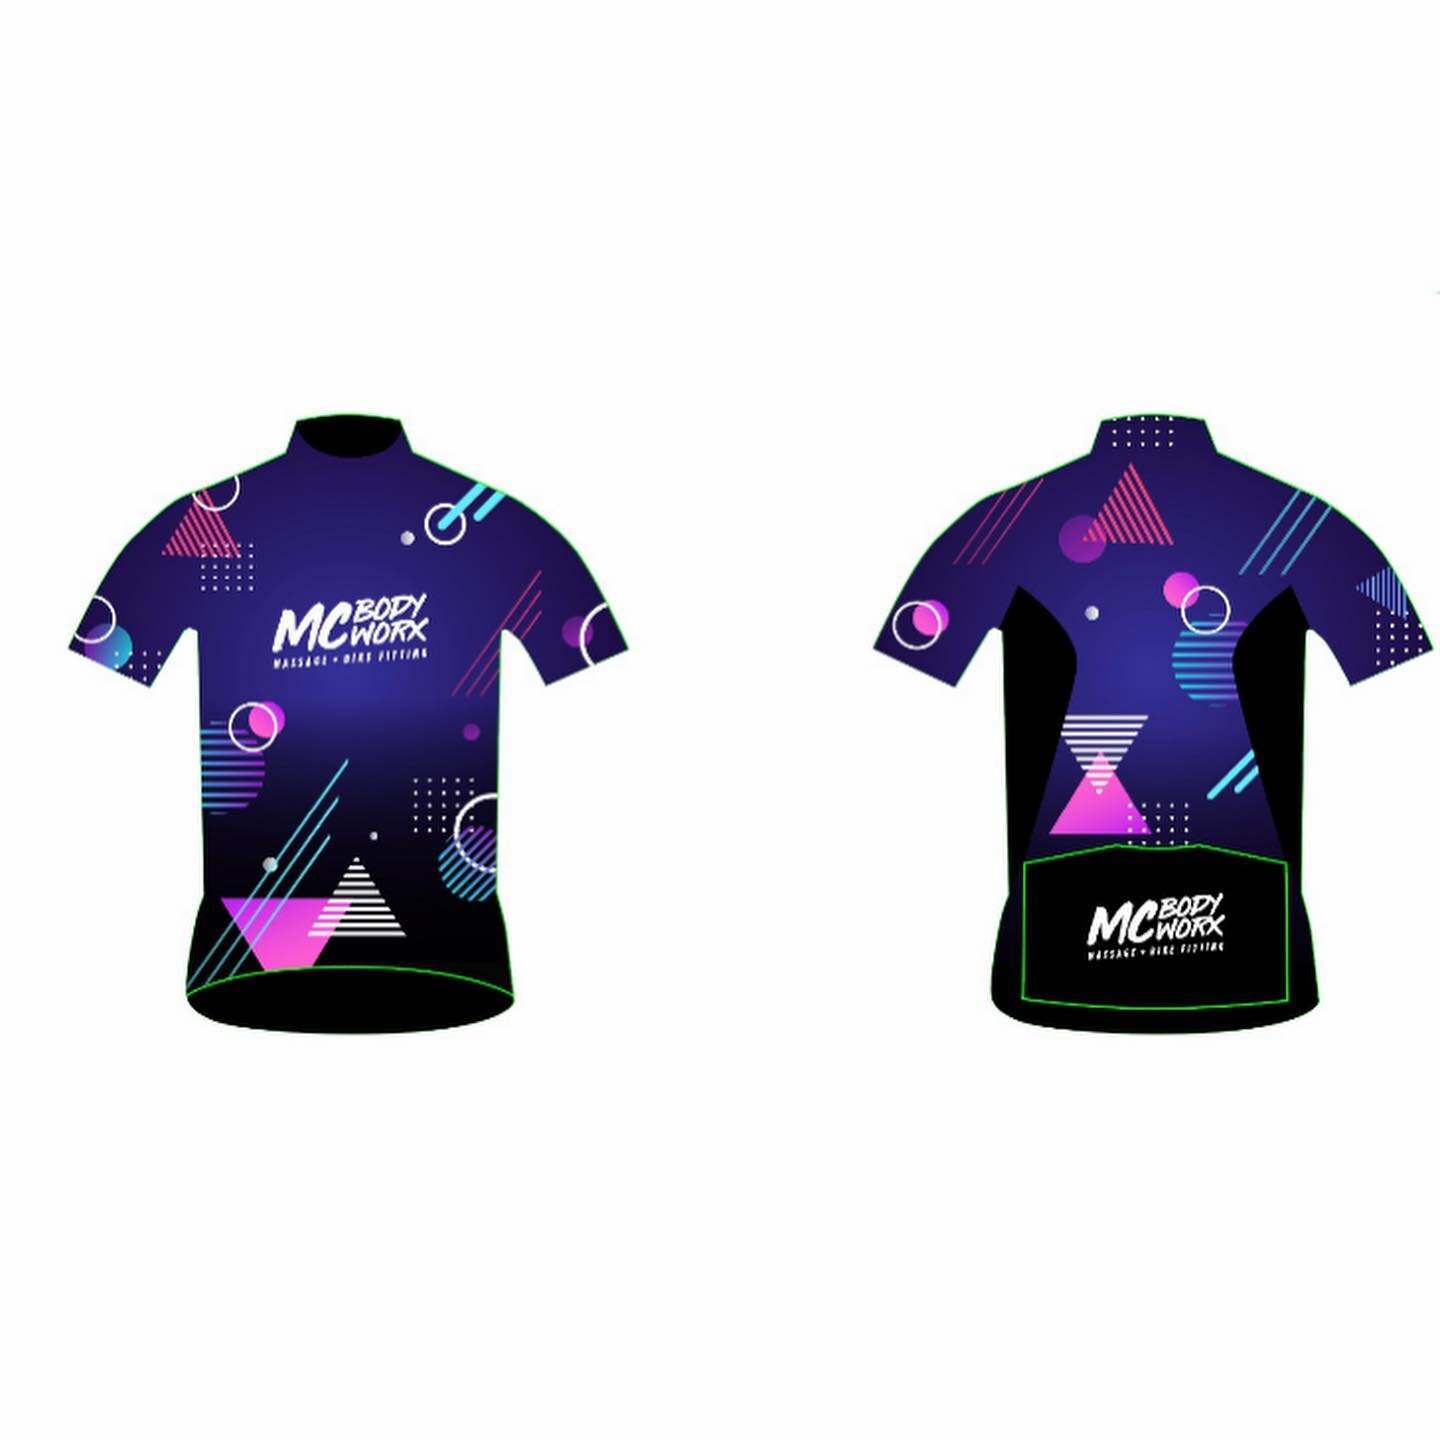 MCBodyworx is getting some new kit made from ow good friend @cuore_australia

Also can&rsquo;t thanks @aewilson enough for her on going design work.
DM if you would like some

Cost is $265 for silver bibs and jersey with gold chamos

#kitdoping #cycl